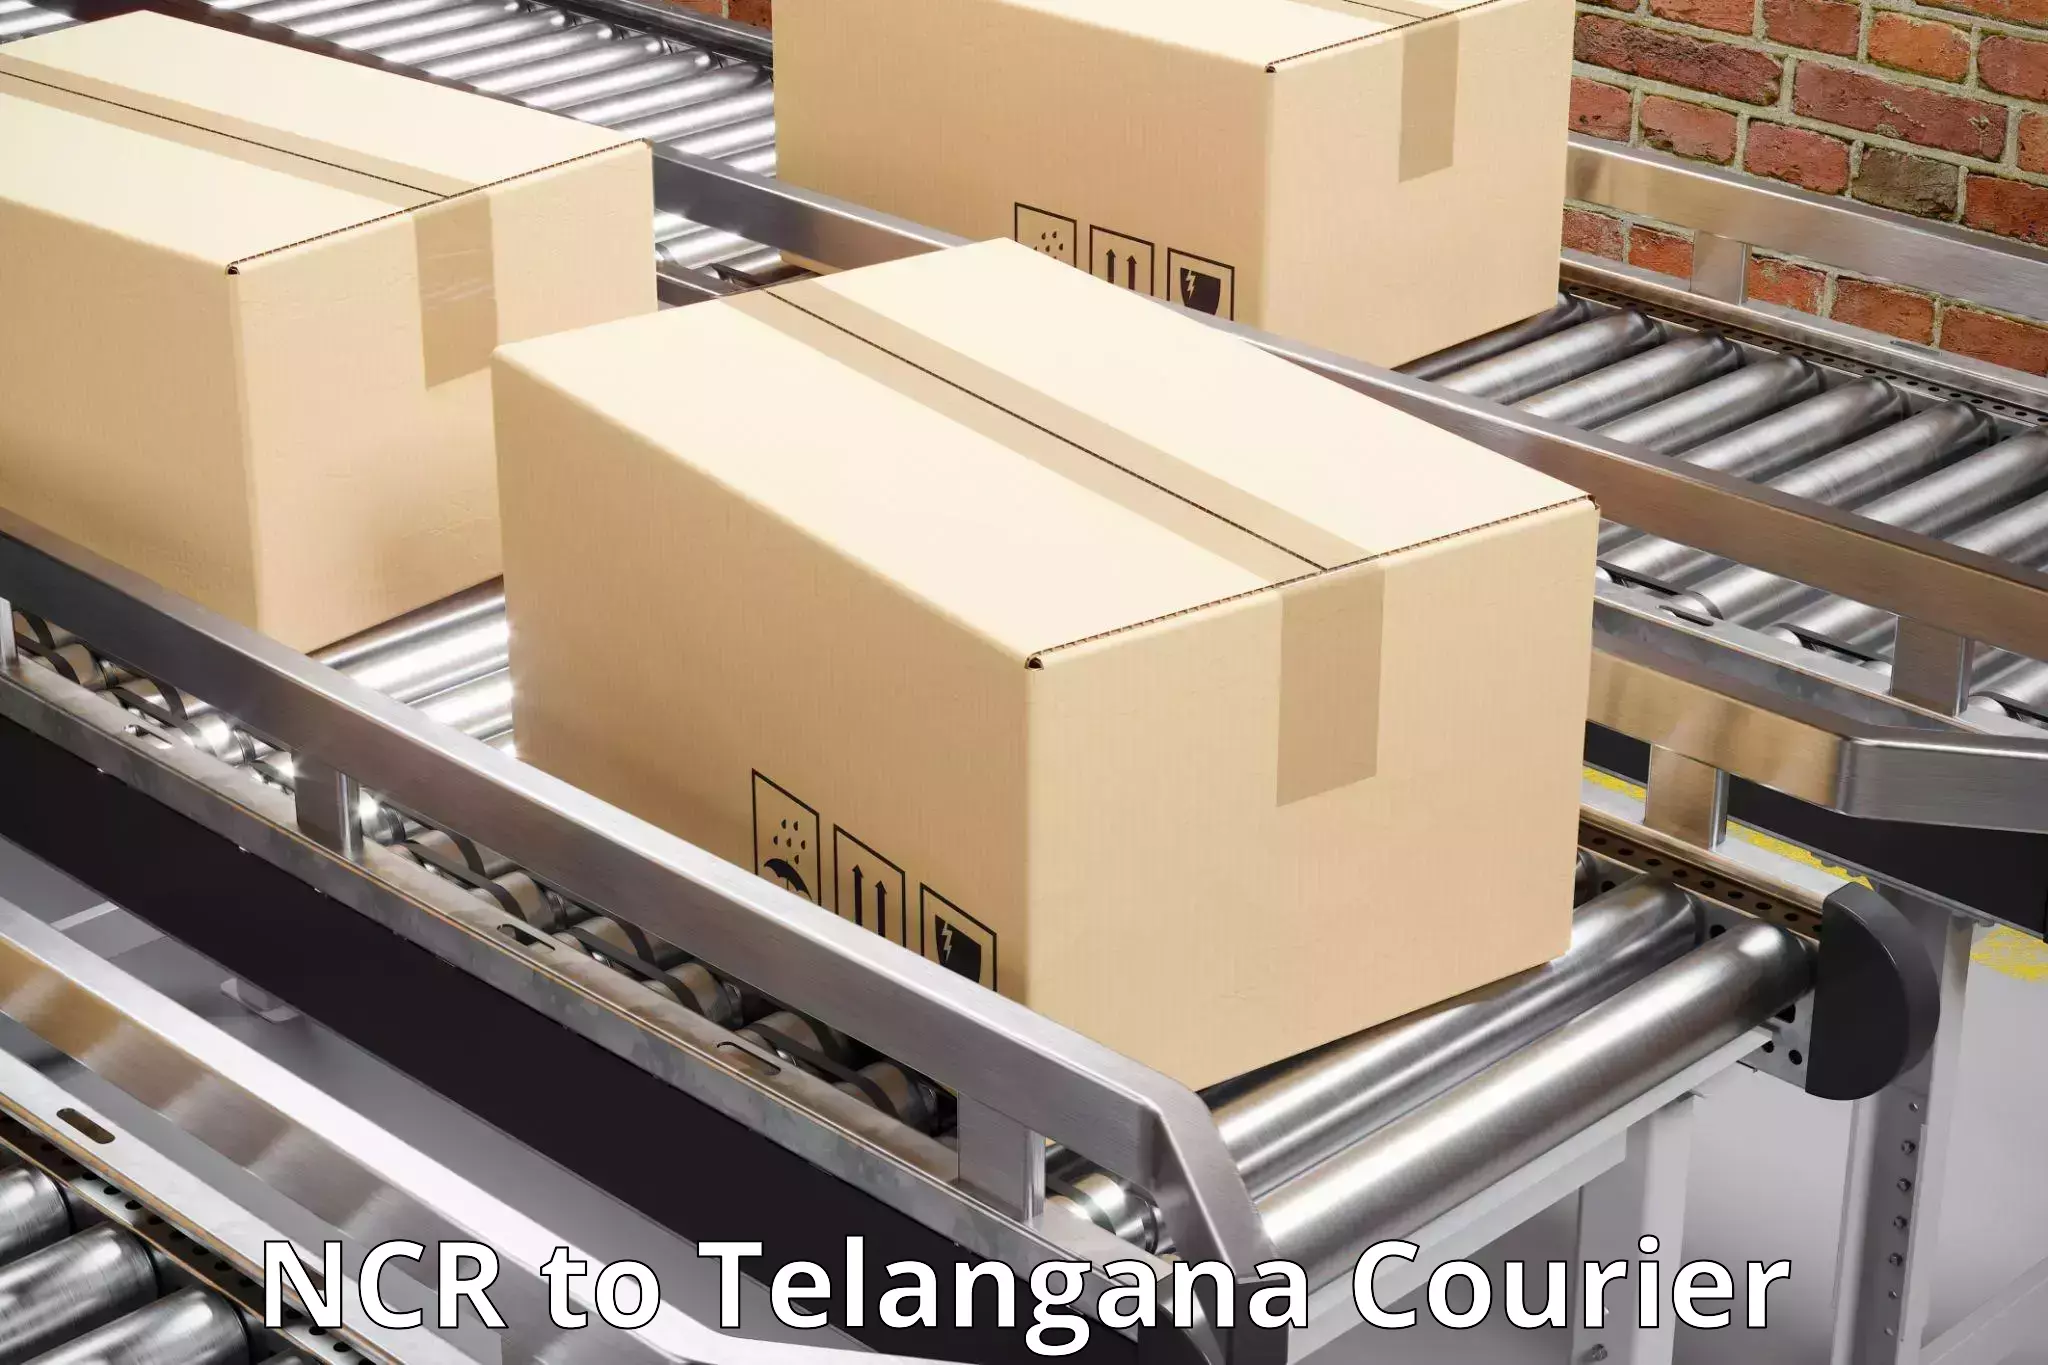 International courier networks NCR to Telangana